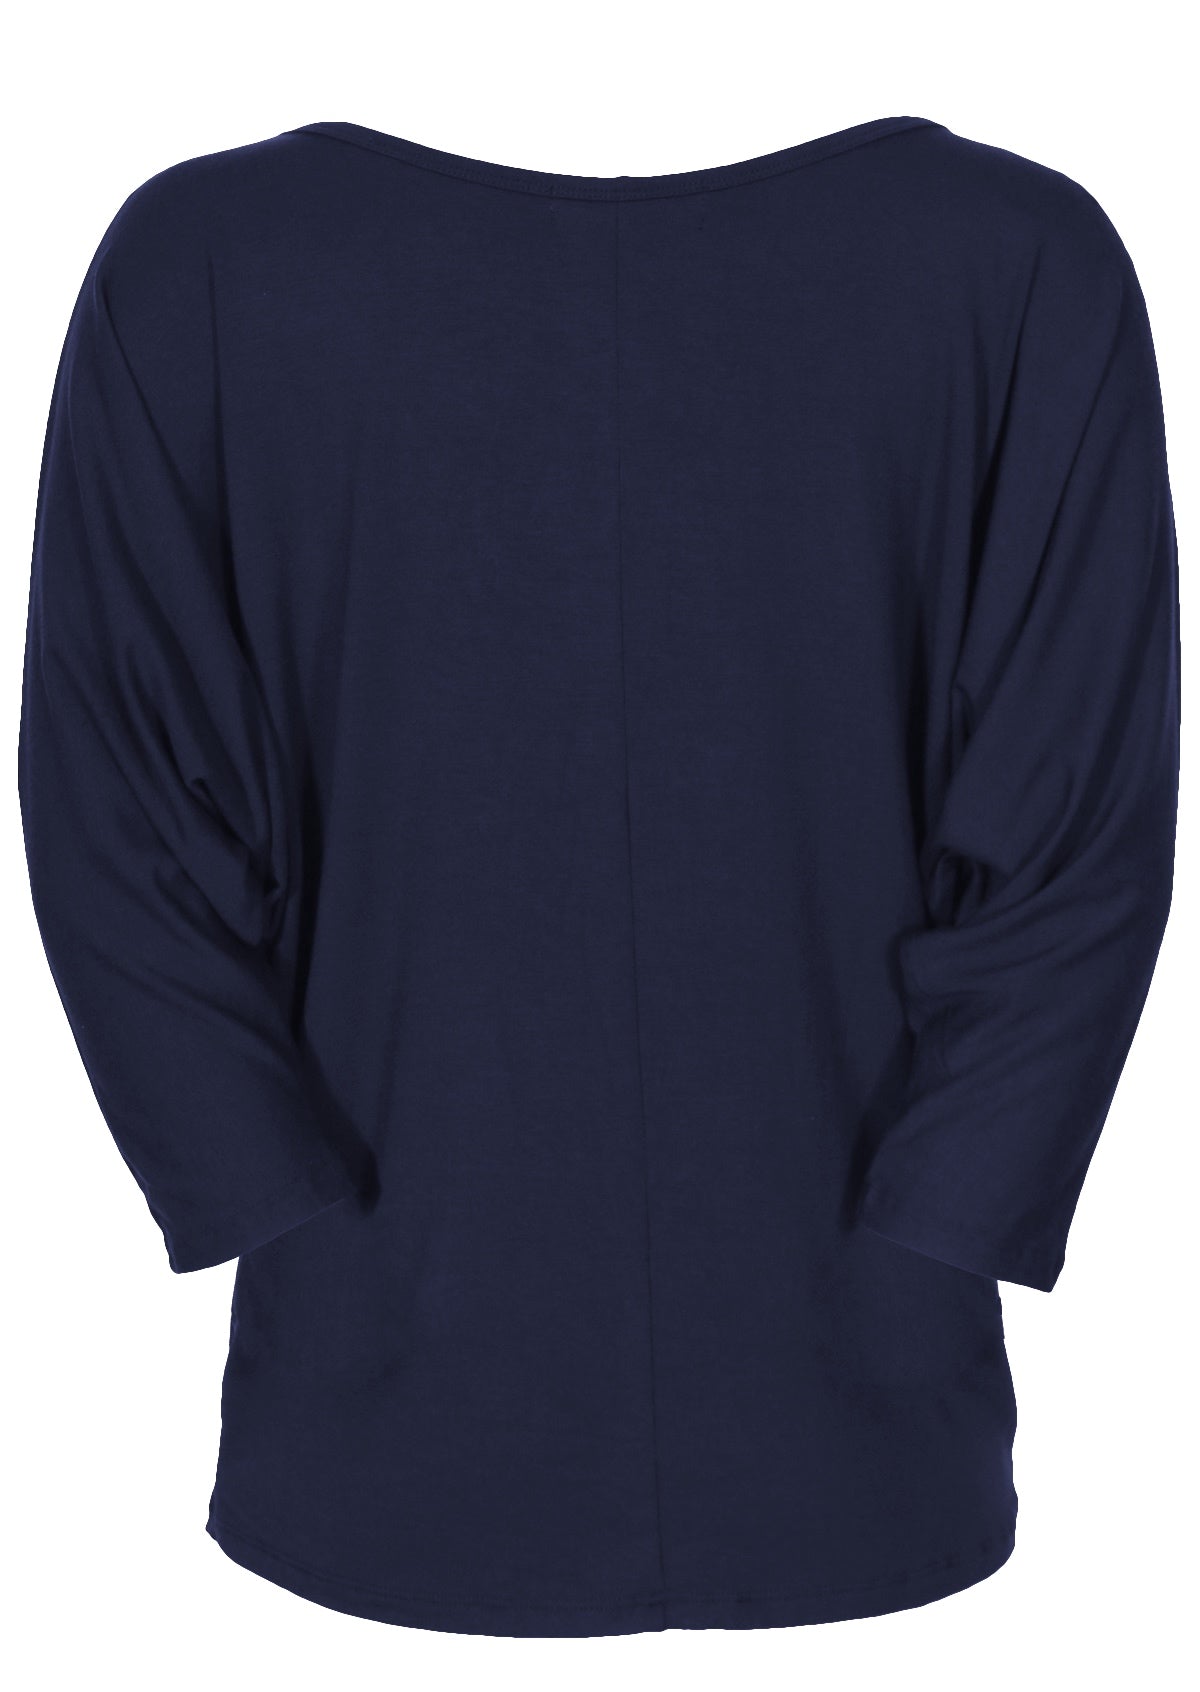 Back view of a women's 3/4 sleeve rayon batwing round neckline navy blue top.